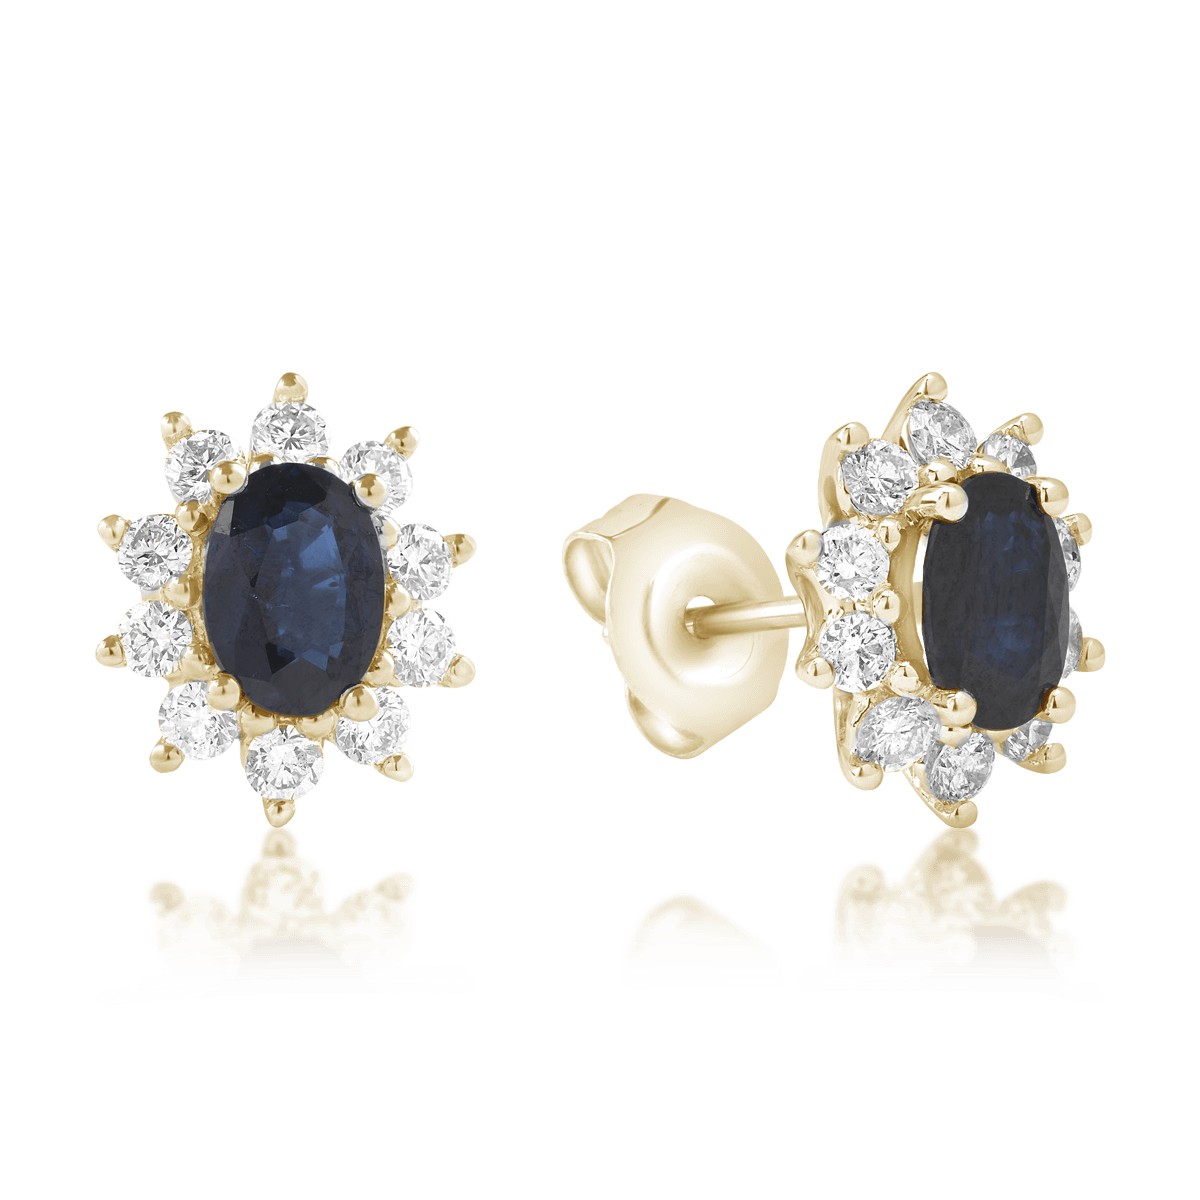 14K yellow gold earrings with 2ct sapphires and 0.84ct diamonds